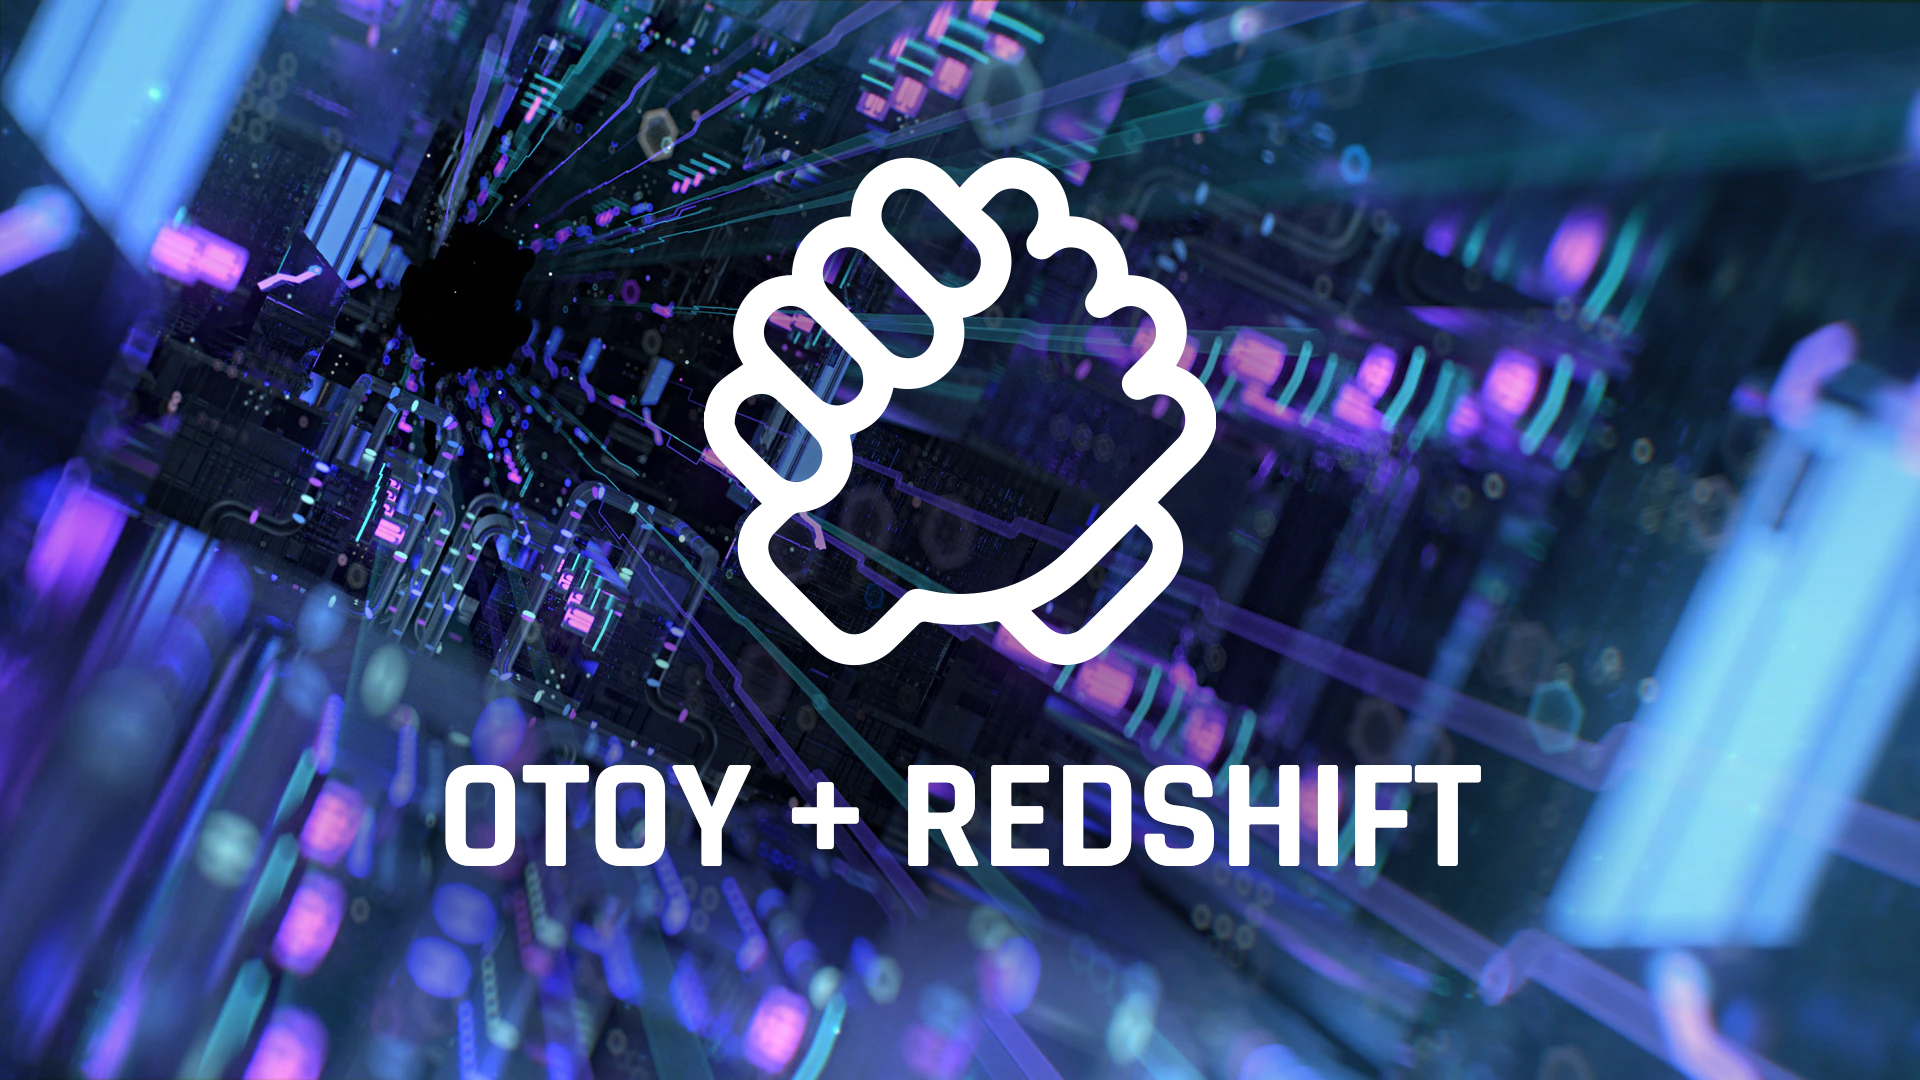 As part of the partnership, OTOY and Maxon will also be developing a native integration of Cinema 4D on the Render Network